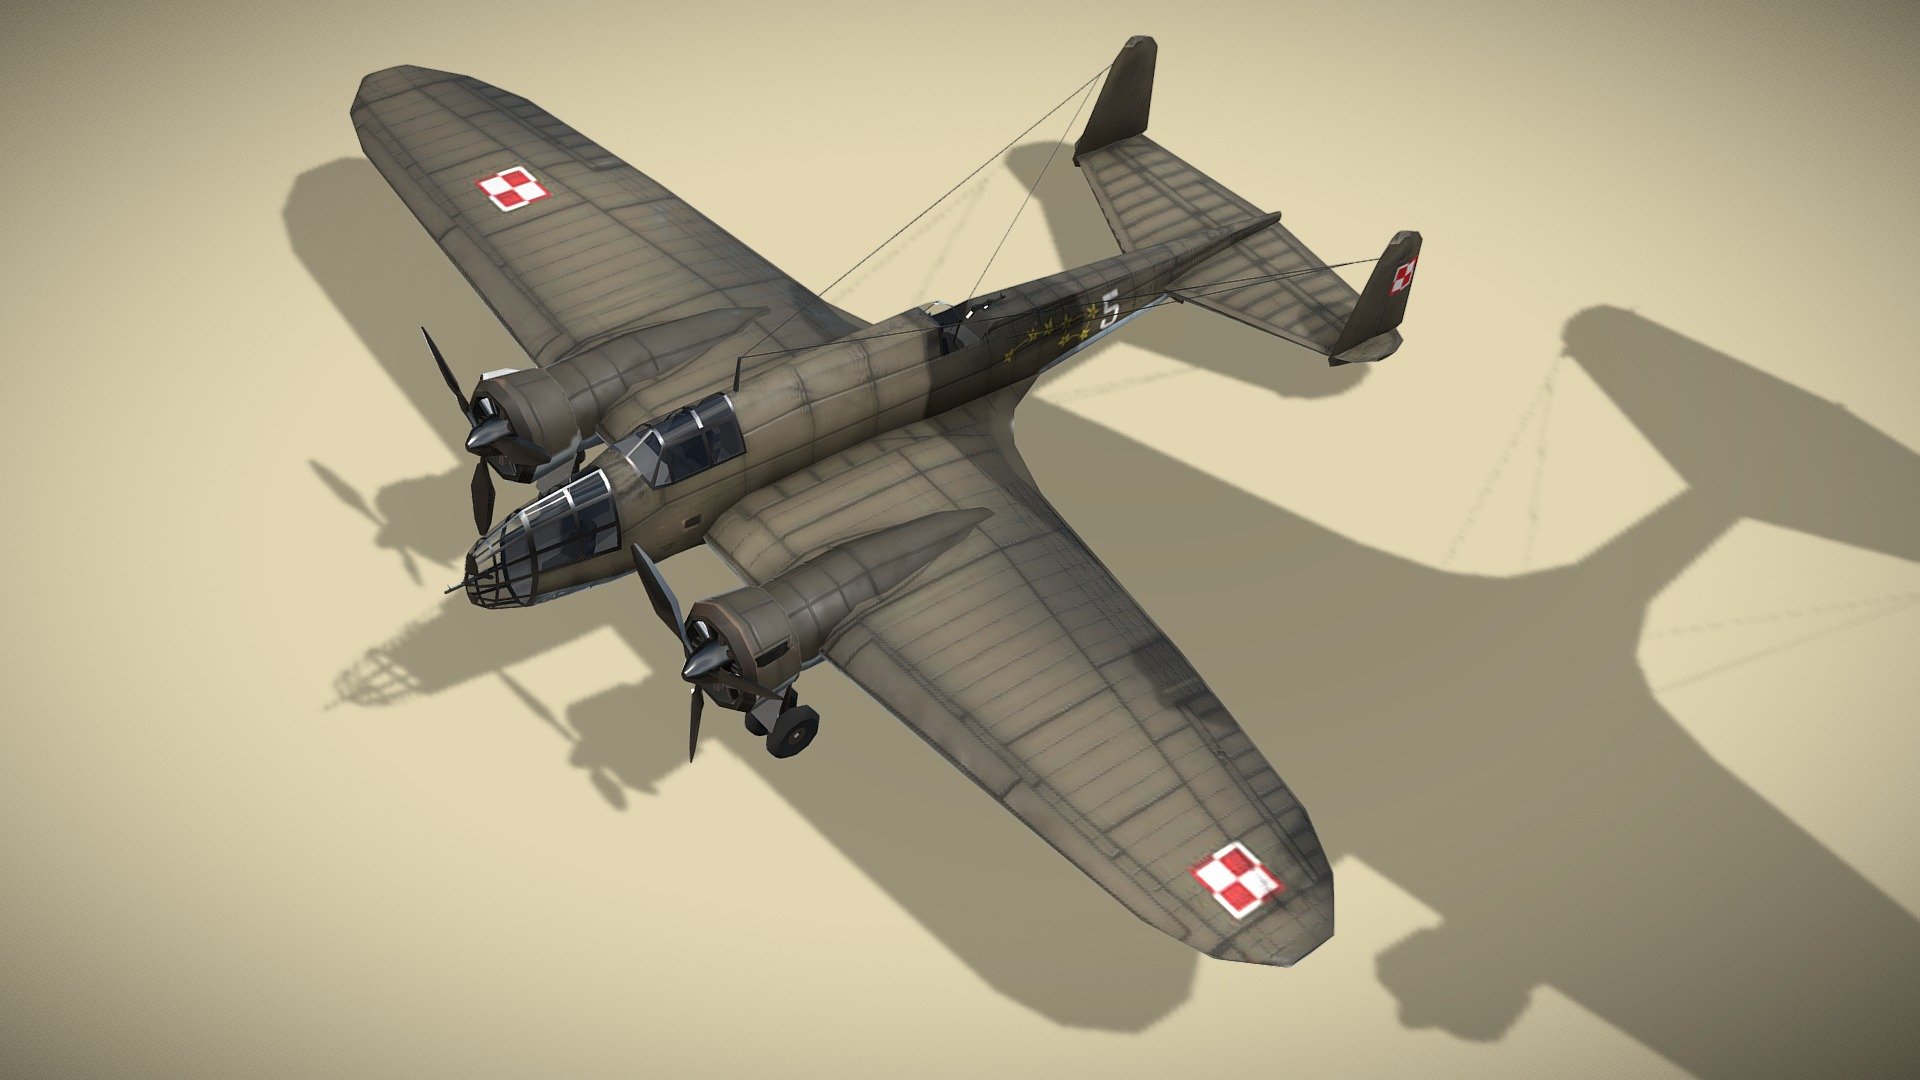 PZL.37 Moose (in polish: Łoś)

Lowpoly model of polish bomber



The PZL.37 Łoś (Moose) was a Polish twin-engined medium bomber designed and manufactured by national aircraft company PZL.

Upon its introduction to service, it was popularly considered to be not only the most modern and effective weapon then possessed by Poland, but also to be one of the most advanced bombers operational in the world. From mid-1938 onwards, interest was expressed by various nations in potential export sales. In response to this highly favourable reception, PZL, being keen to meet the demands, developed additional variants that were intended for the export market, such as the PZL.37C.



1 standing version with wheels and 2 flying versions with trails, afterburner, pilot and armament.

Model has bump map, roughness map and 3 x diffuse textures.



Check also my other aircrafts and cars.

Patreon with monthly free model - PZL.37 Łoś Moose - Buy Royalty Free 3D model by NETRUNNER_pl 3d model